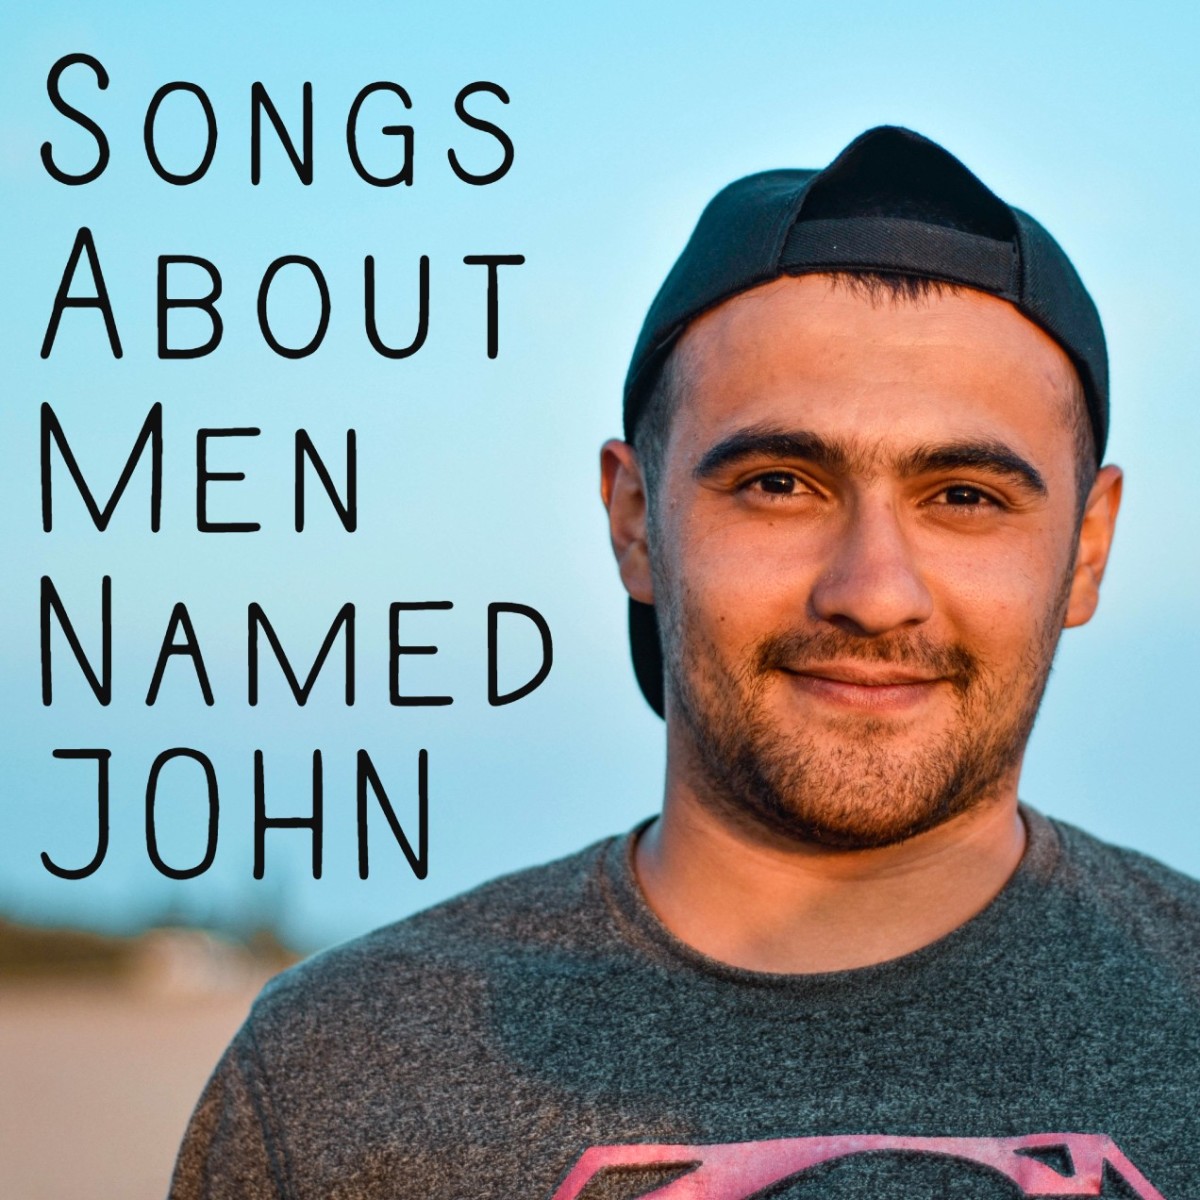 Celebrate the name John, a strong, solid name that has been one of the top three names in the US in the last 100 years. Make a playlist of pop, rock, country, and R&B songs about men named John.